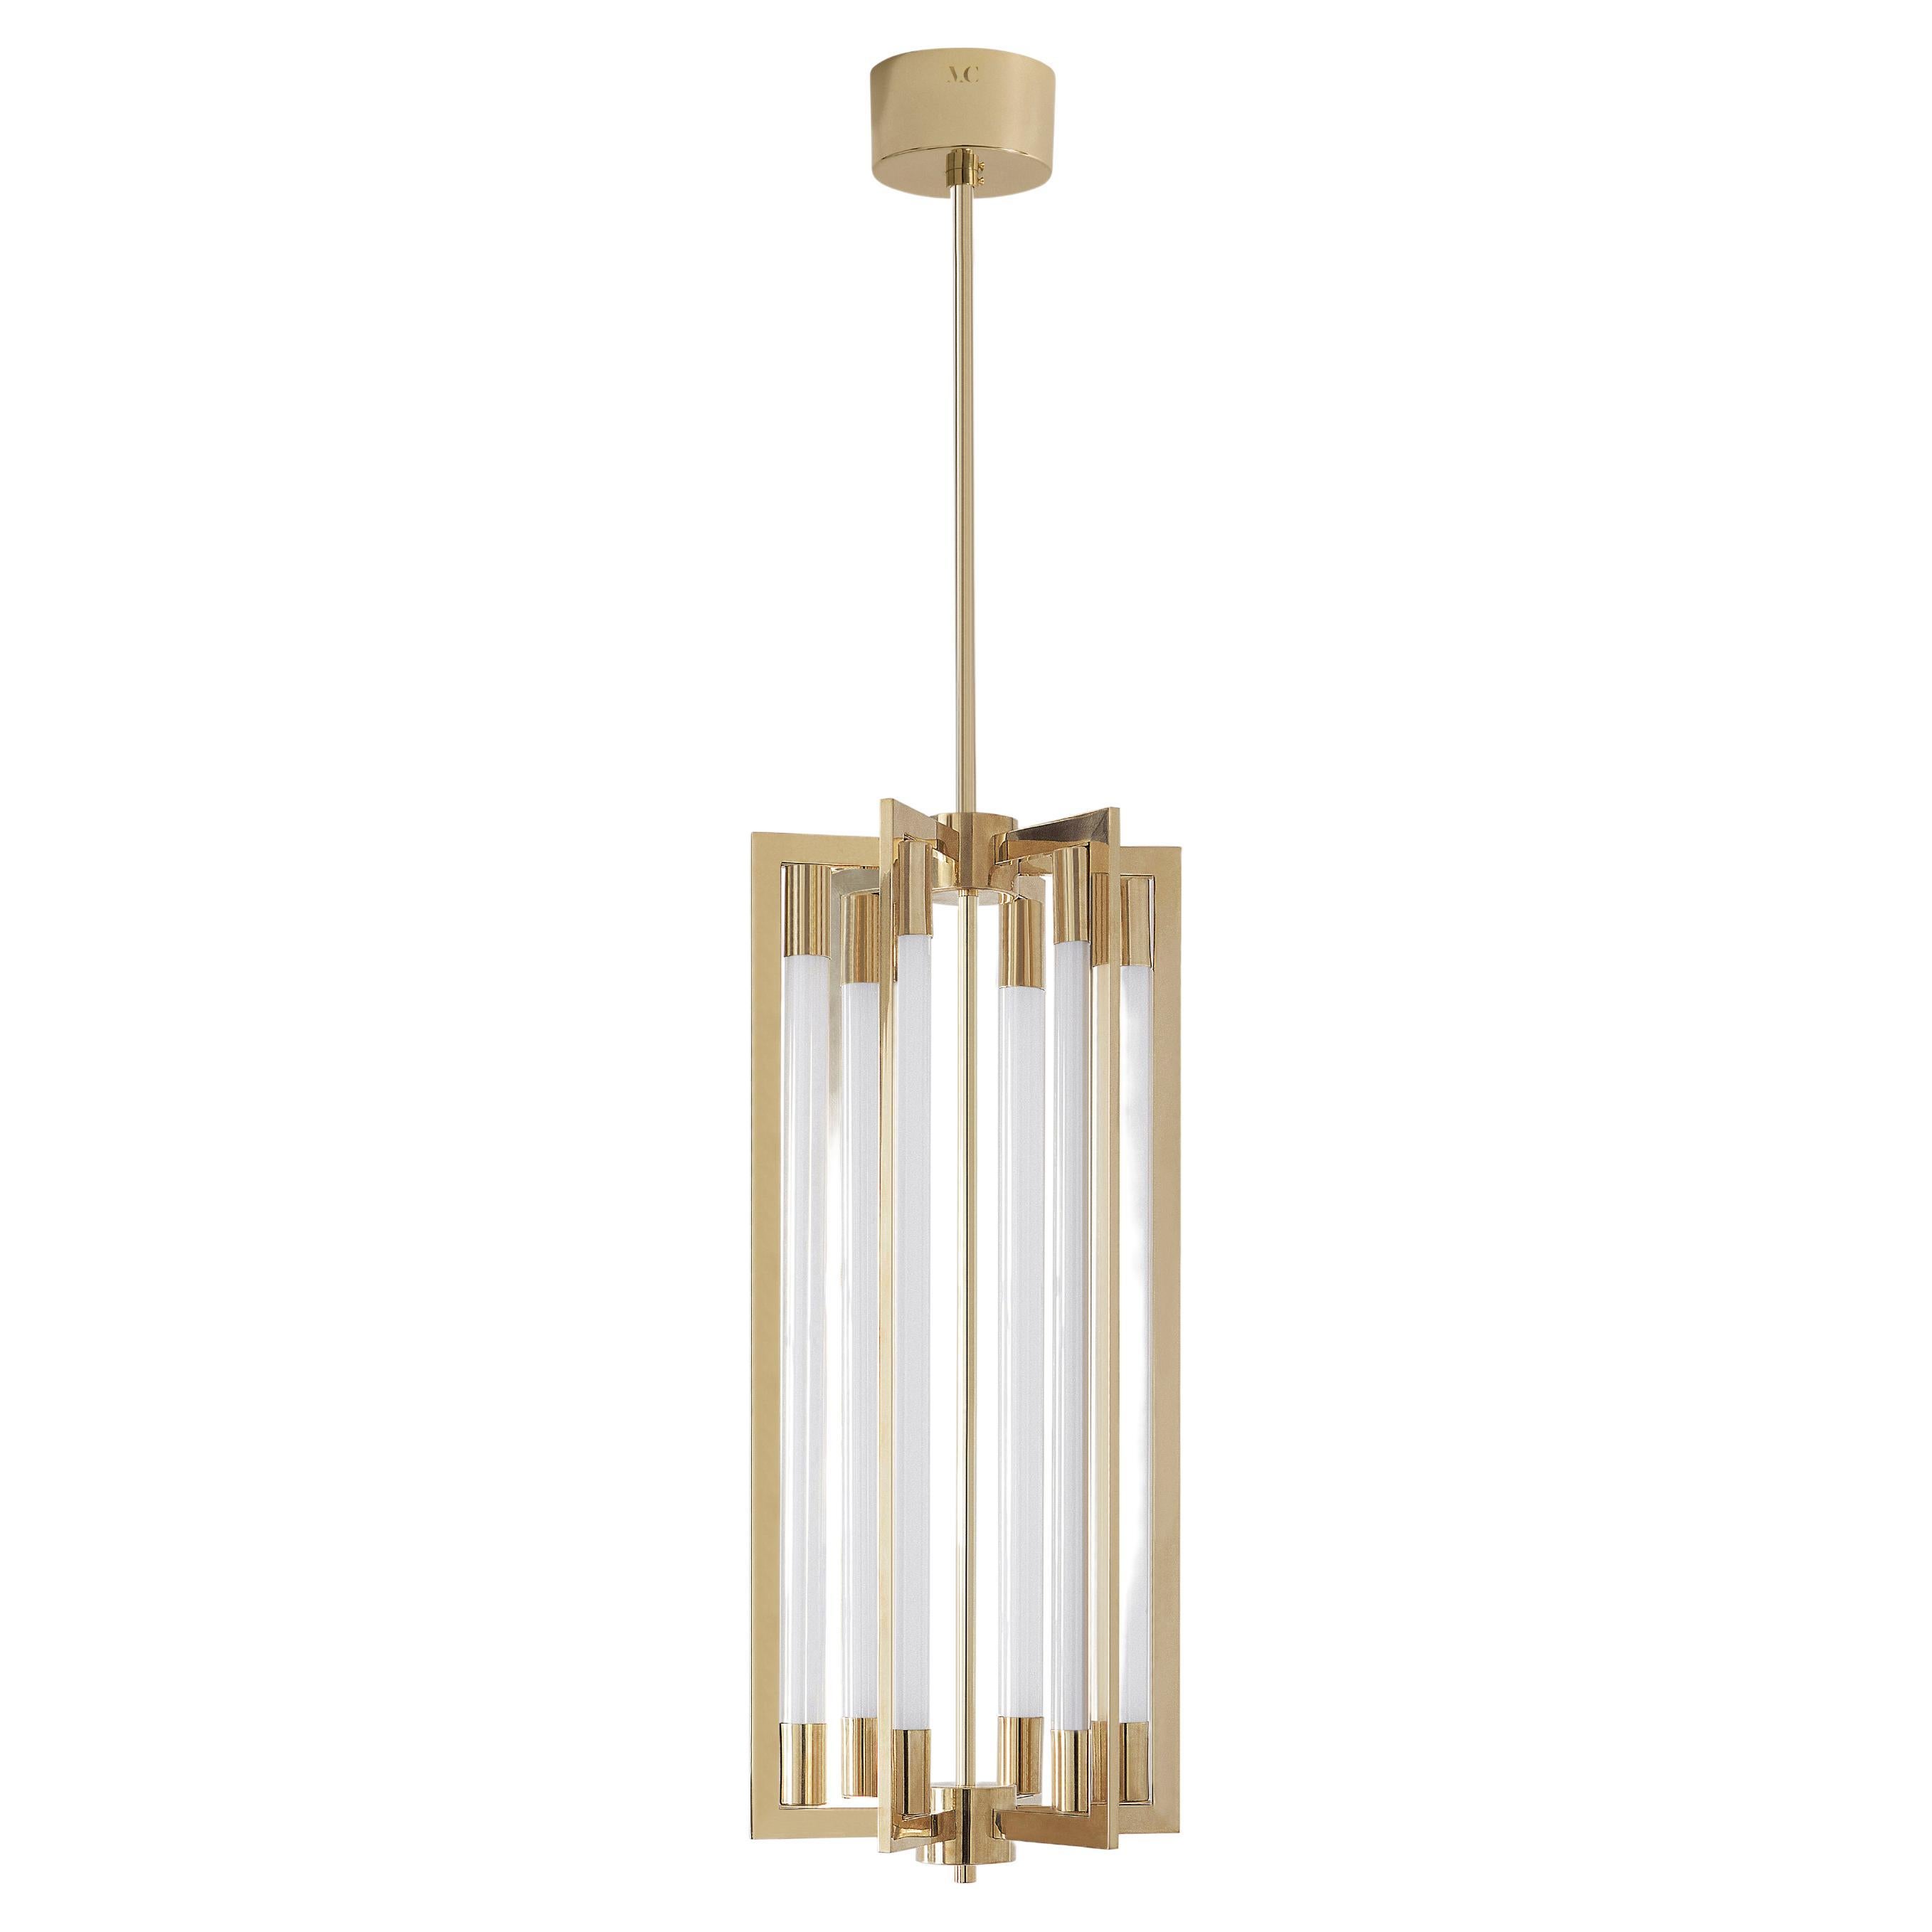 Chandelier 11 by Magic Circus Editions
Dimensions: W 300 cm
Materials: smooth brass, glass
Available finishes: brass, nickel
6 × Tube LED T8 / 17 W. 220V

All our lamps can be wired according to each country. If sold to the USA it will be